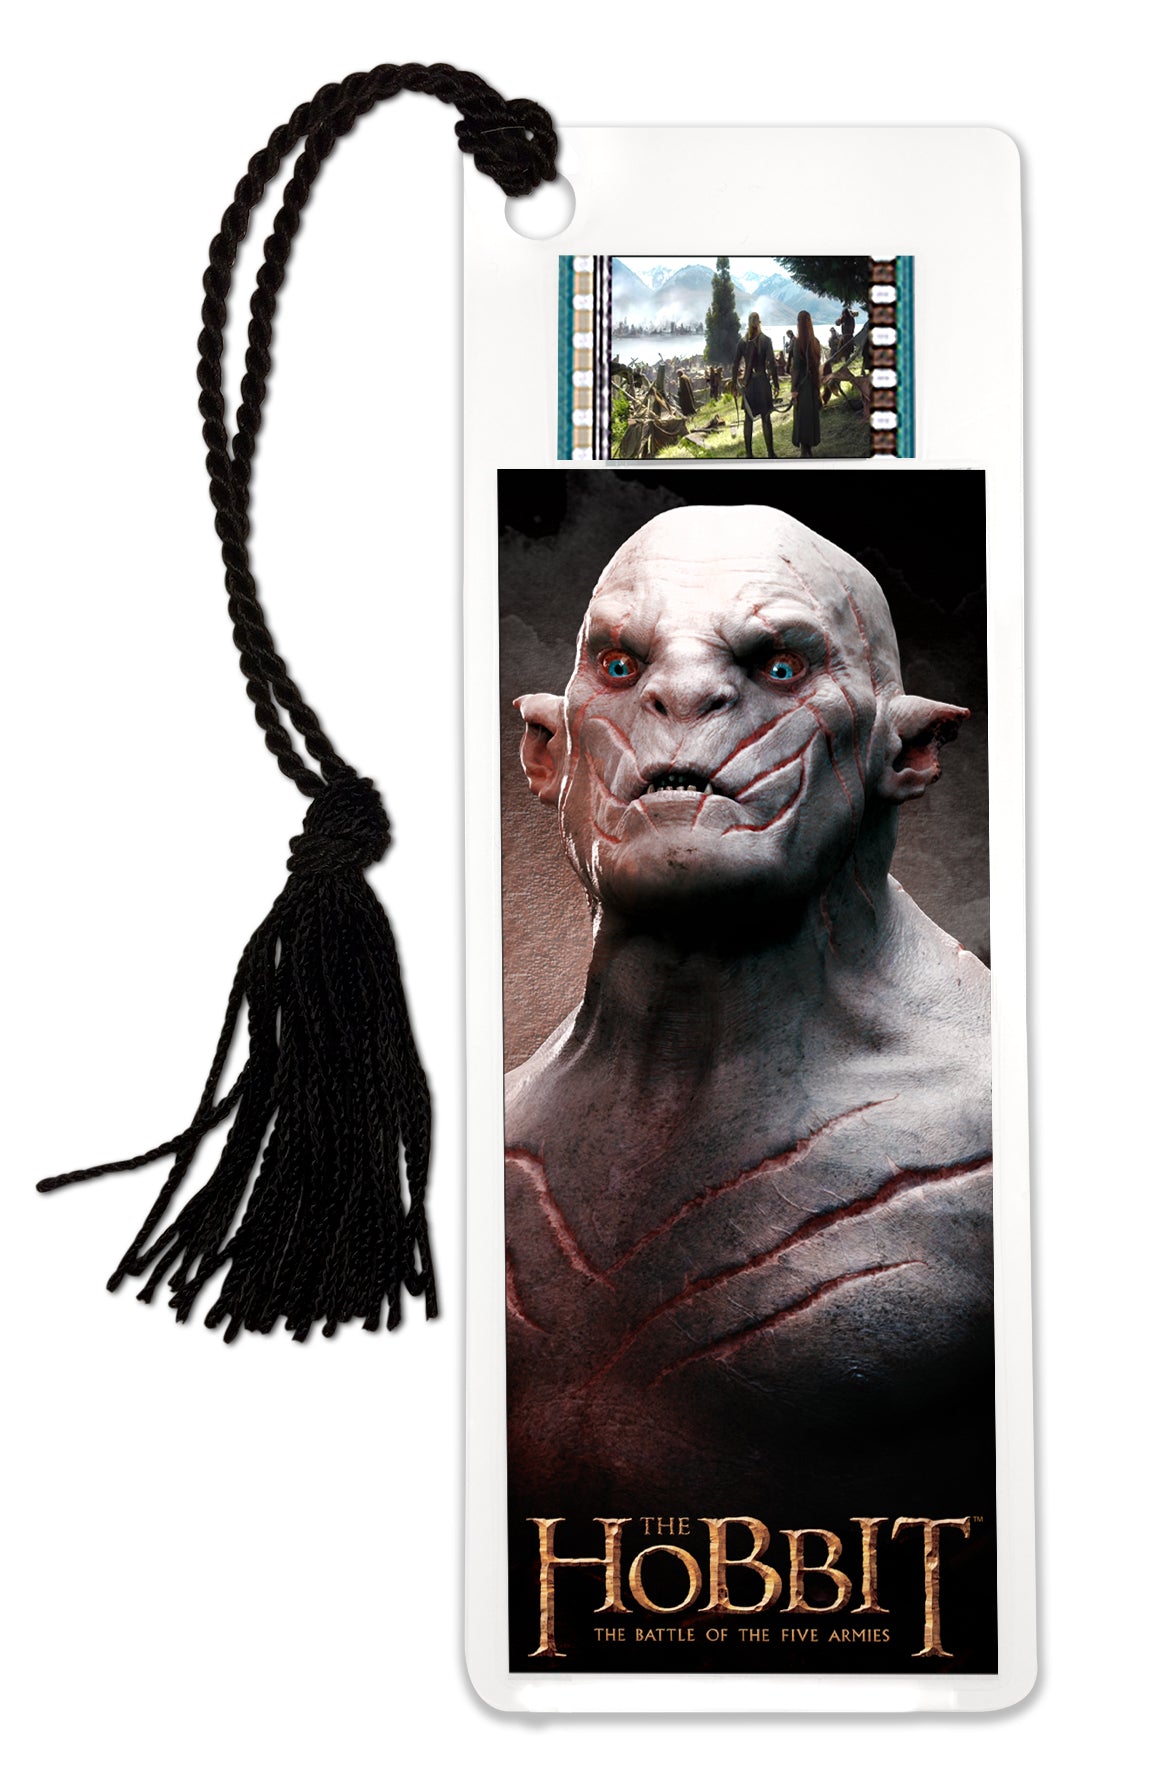 THE HOBBIT: THE BATTLE OF THE FIVE ARMIES (Azog) FilmCells™ Bookmark USBM688